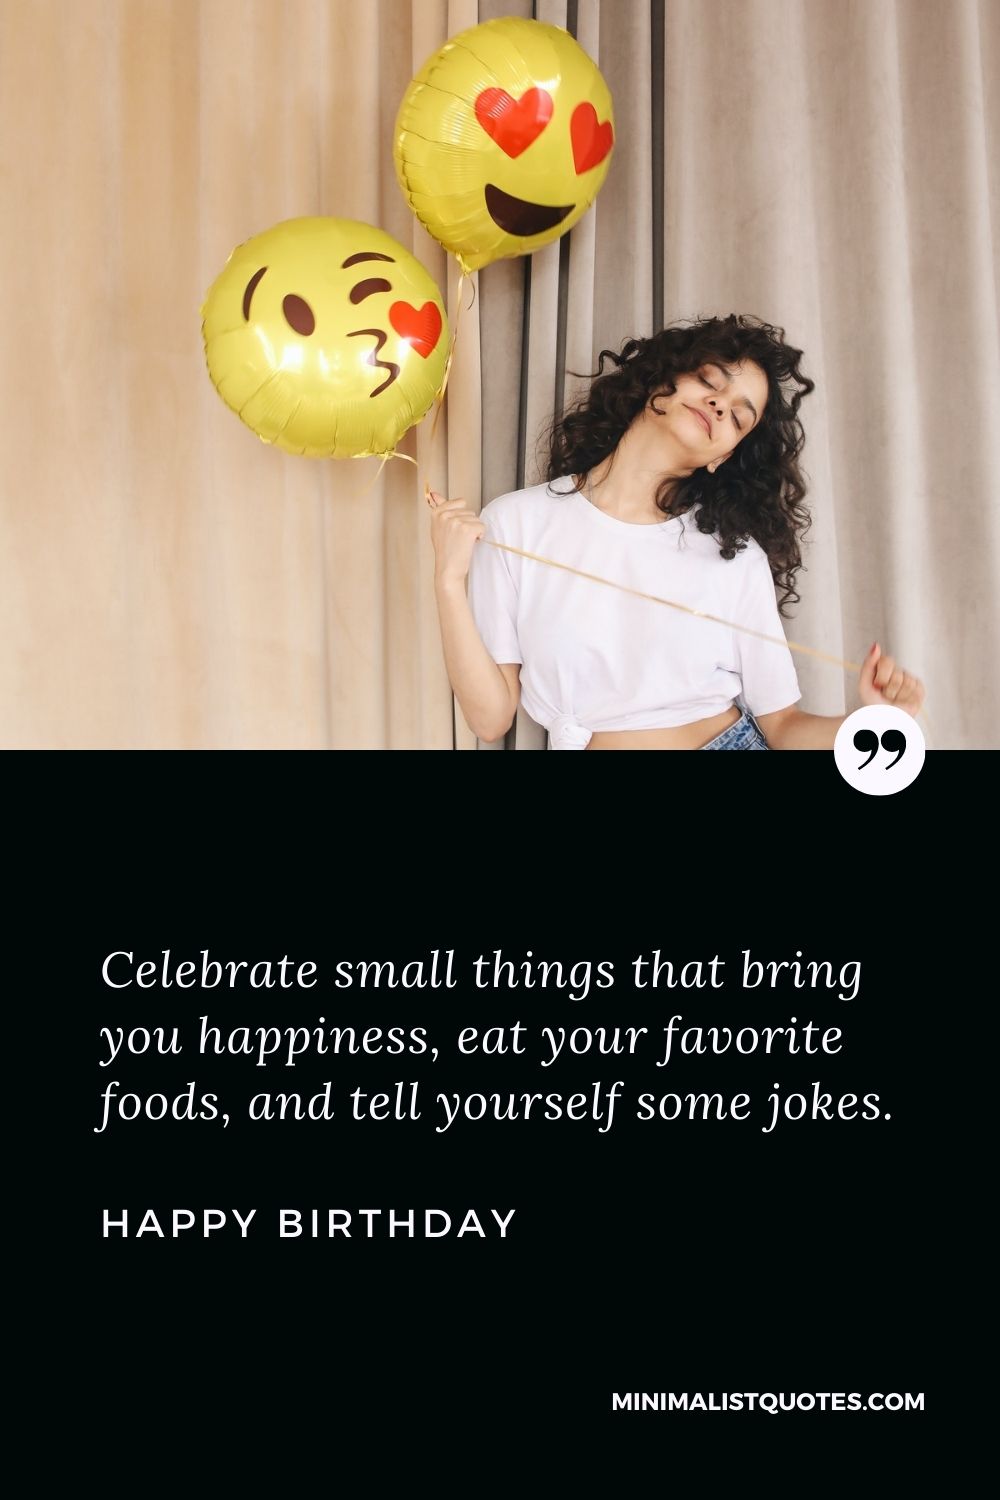 Celebrate small things that bring you happiness, eat your favorite foods,  and tell yourself some jokes. Happy Birthday!